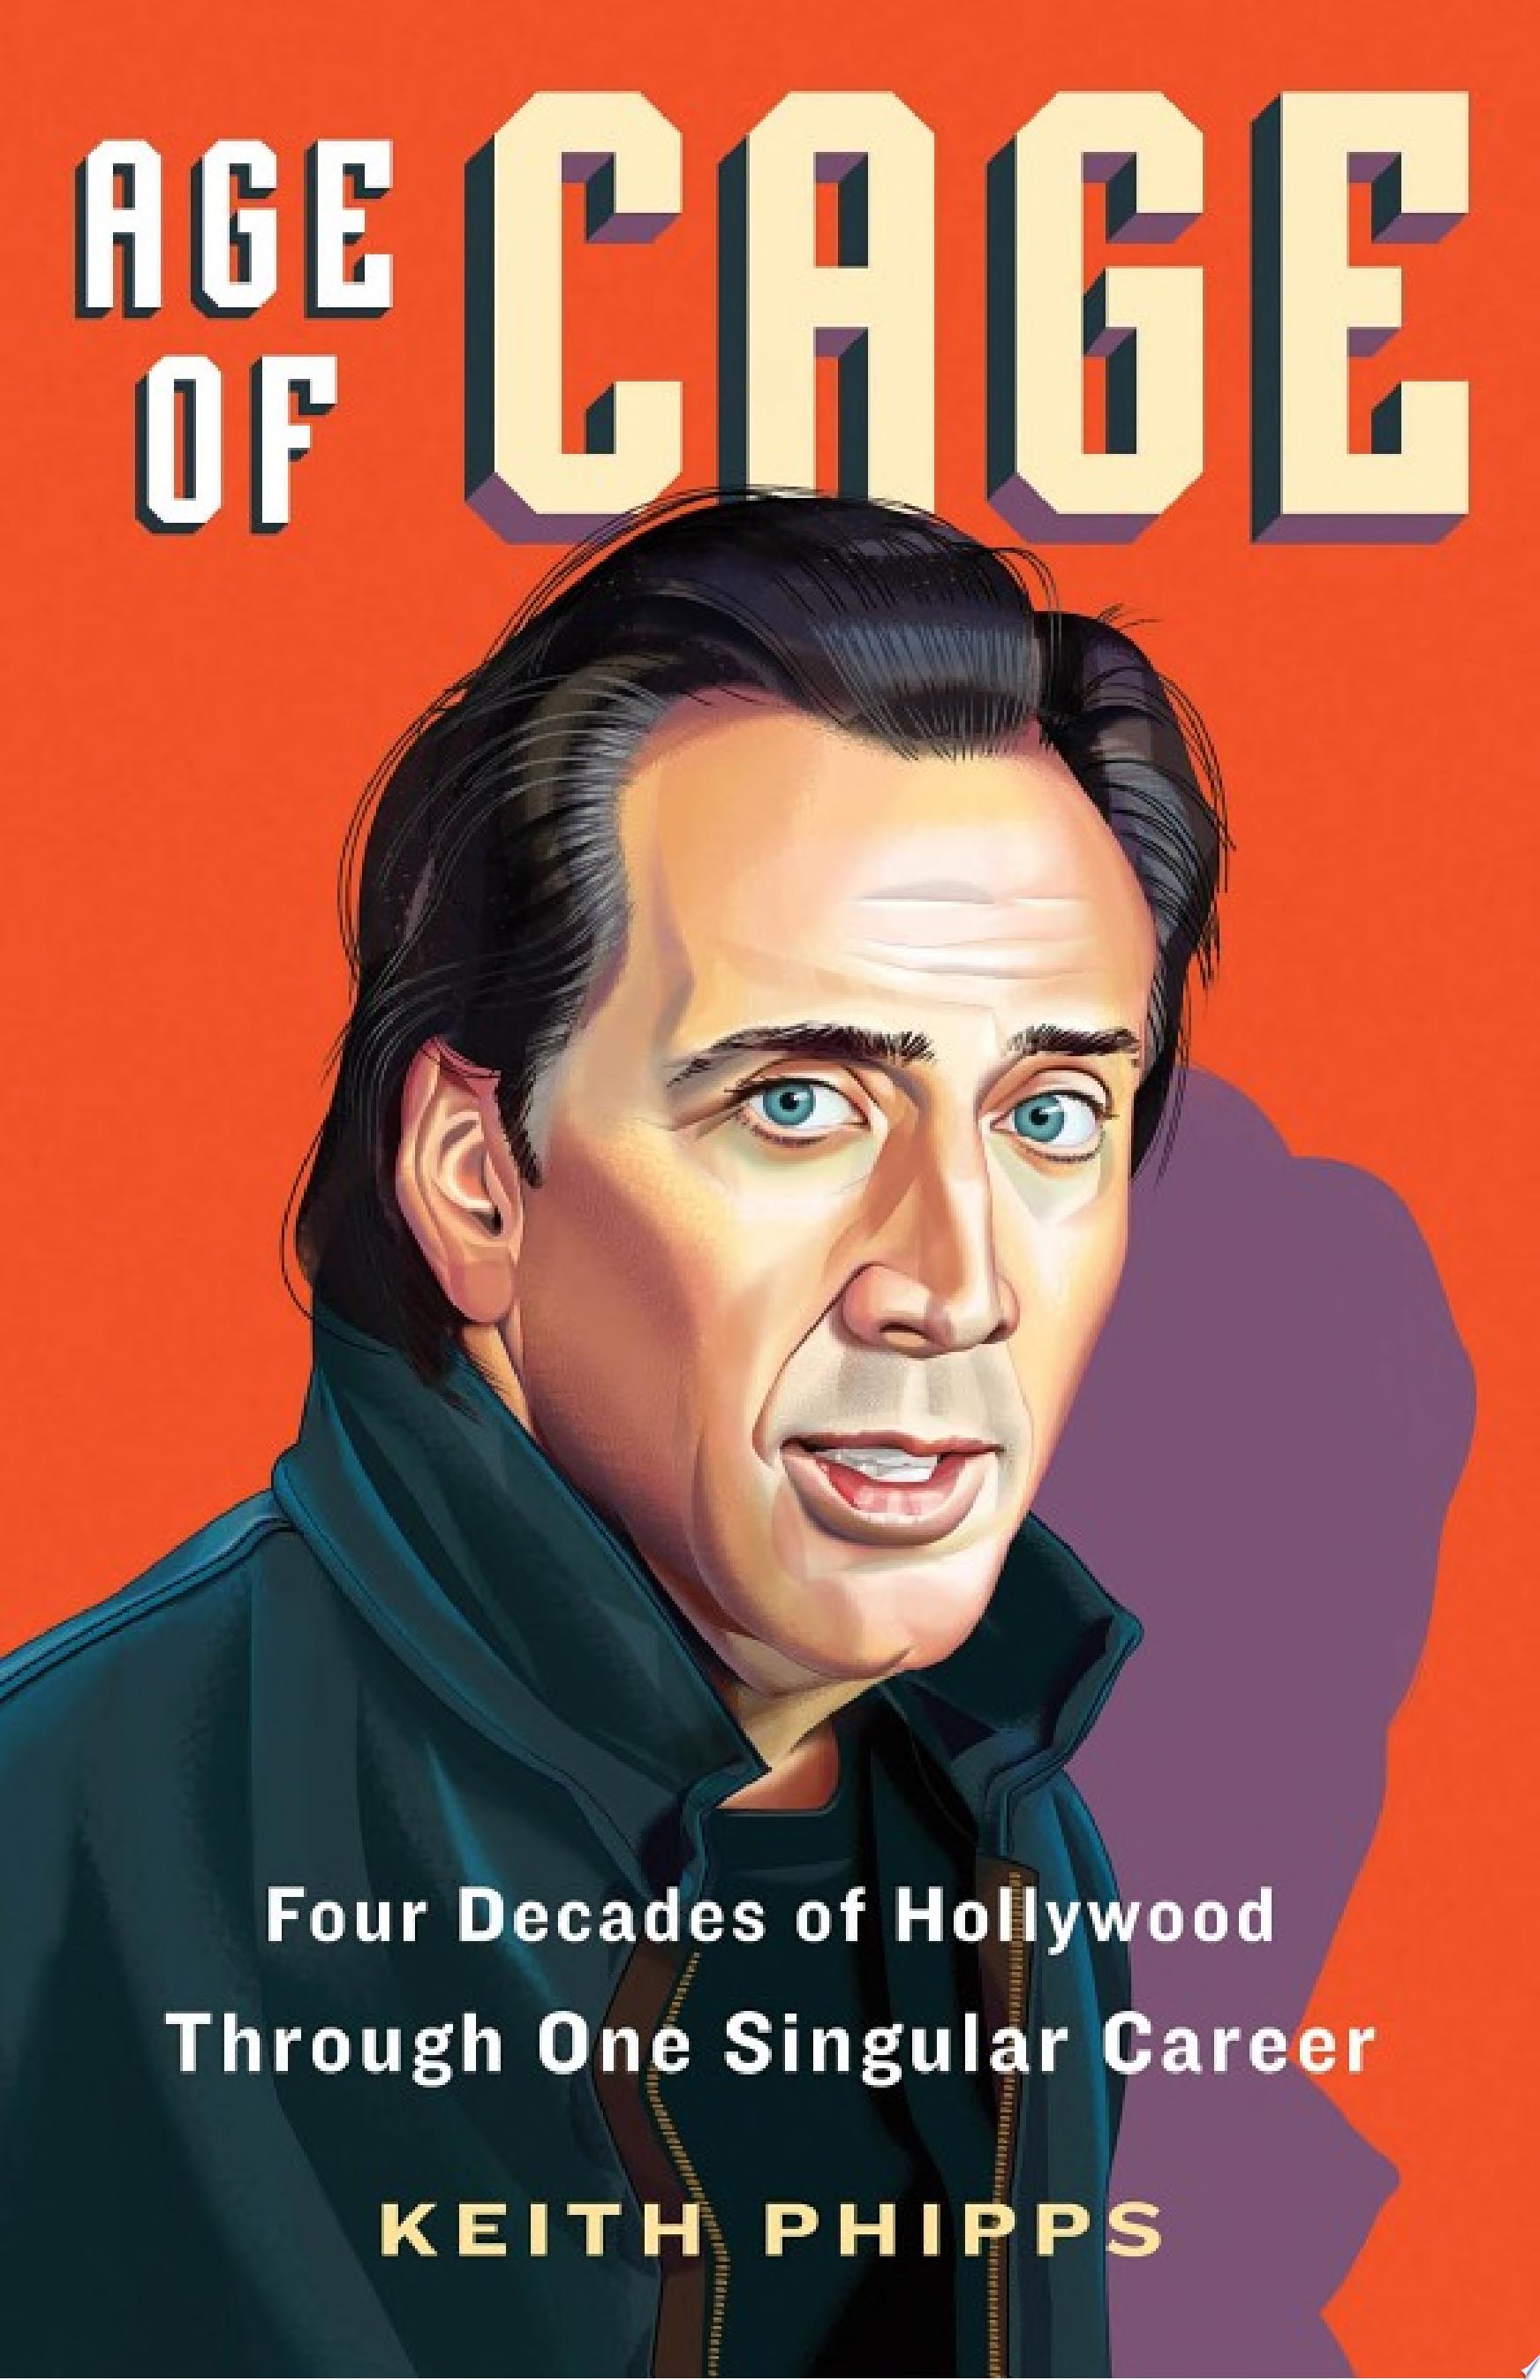 Image for "Age of Cage"